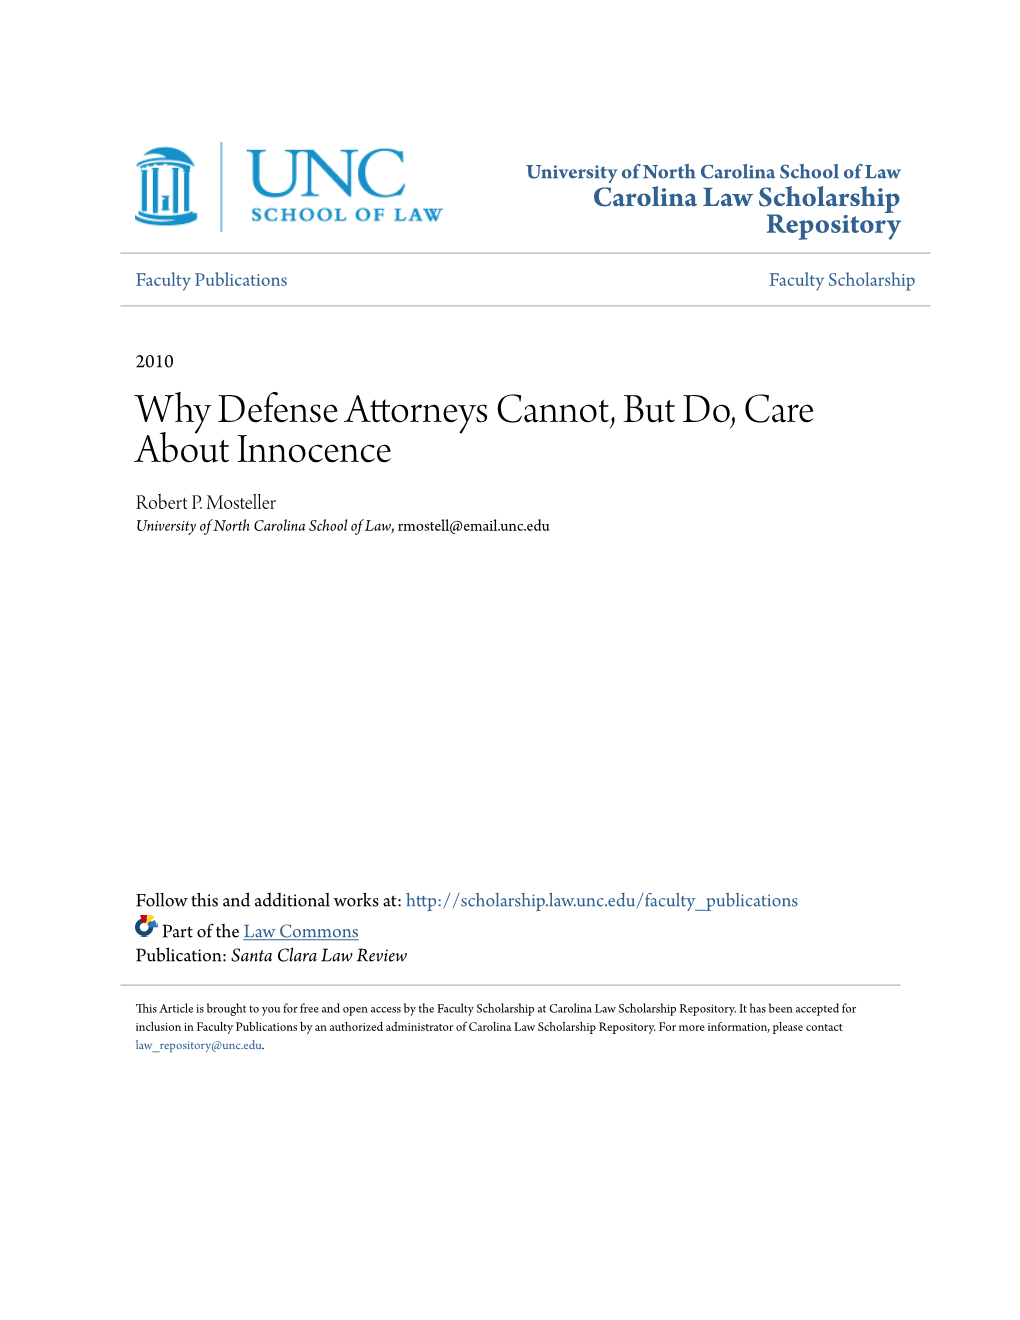 Why Defense Attorneys Cannot, but Do, Care About Innocence Robert P